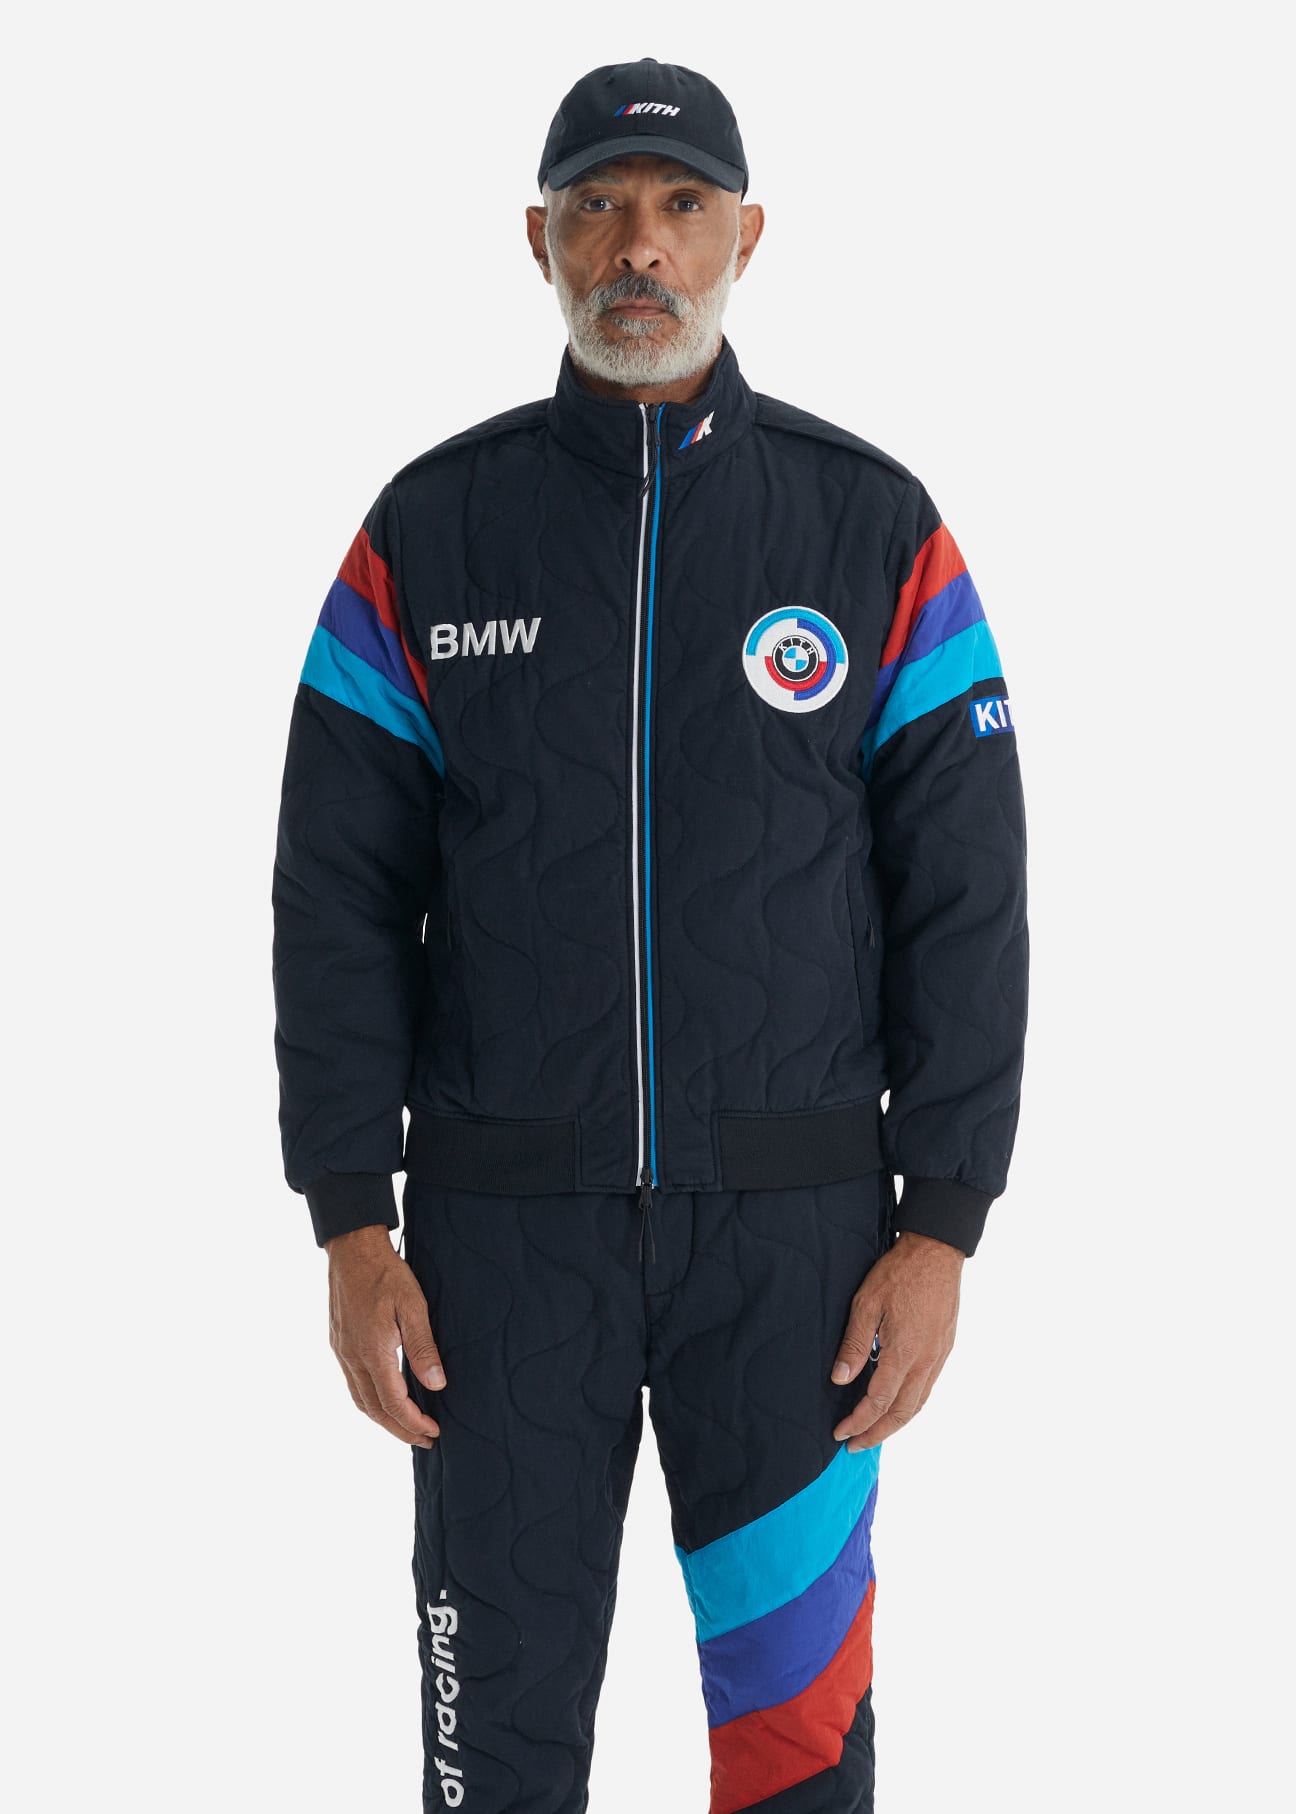 BMW Mechanic overall, Work Wear jumpsuit, Boiler Suit, Workwear Coveralls |  eBay